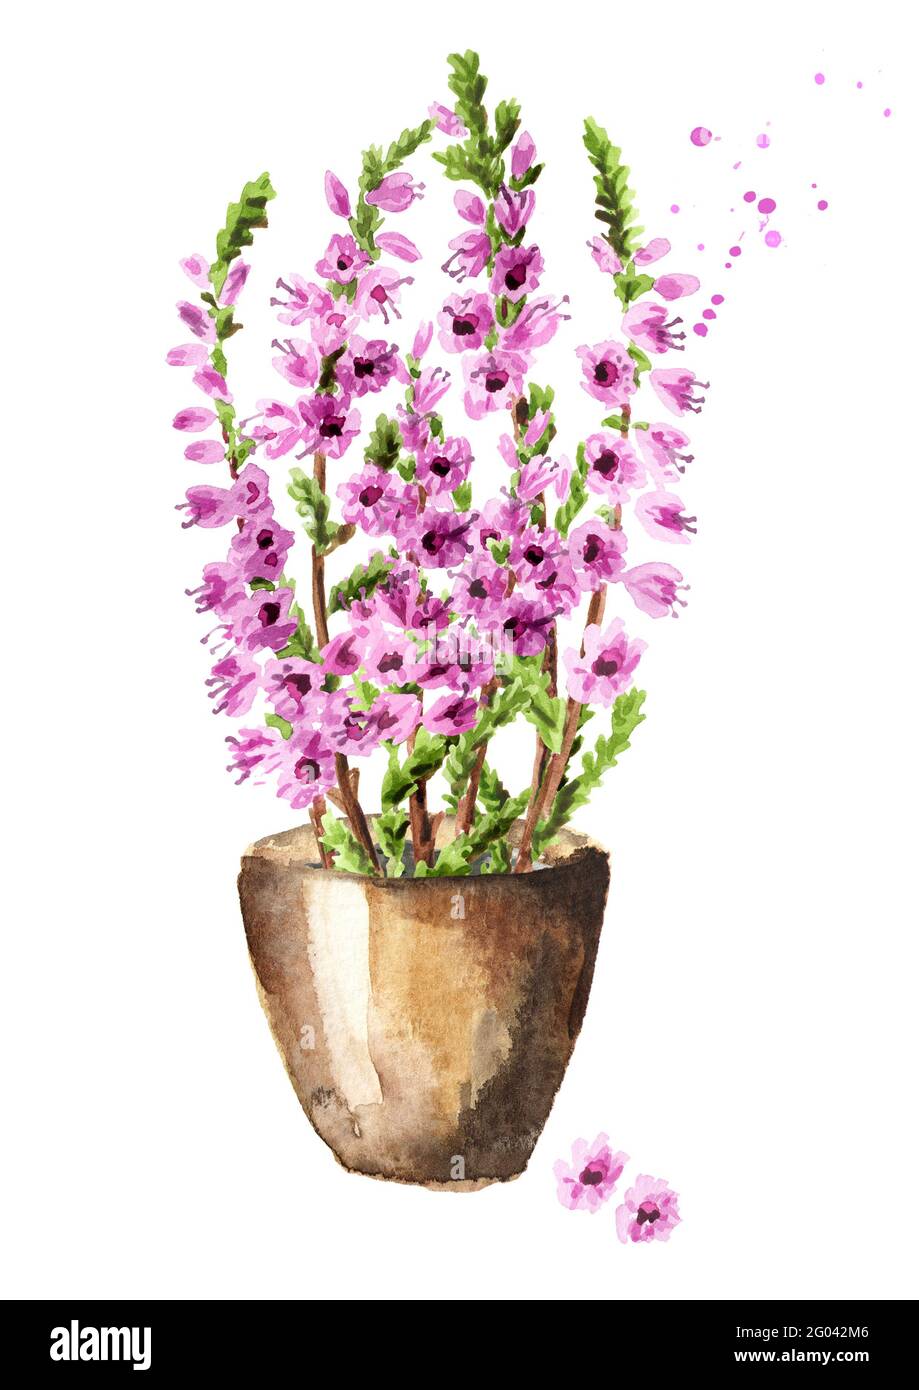 Purple heather flowers  in the pot, symbol of good luck. Watercolor hand drawn illustration isolated on white background Stock Photo